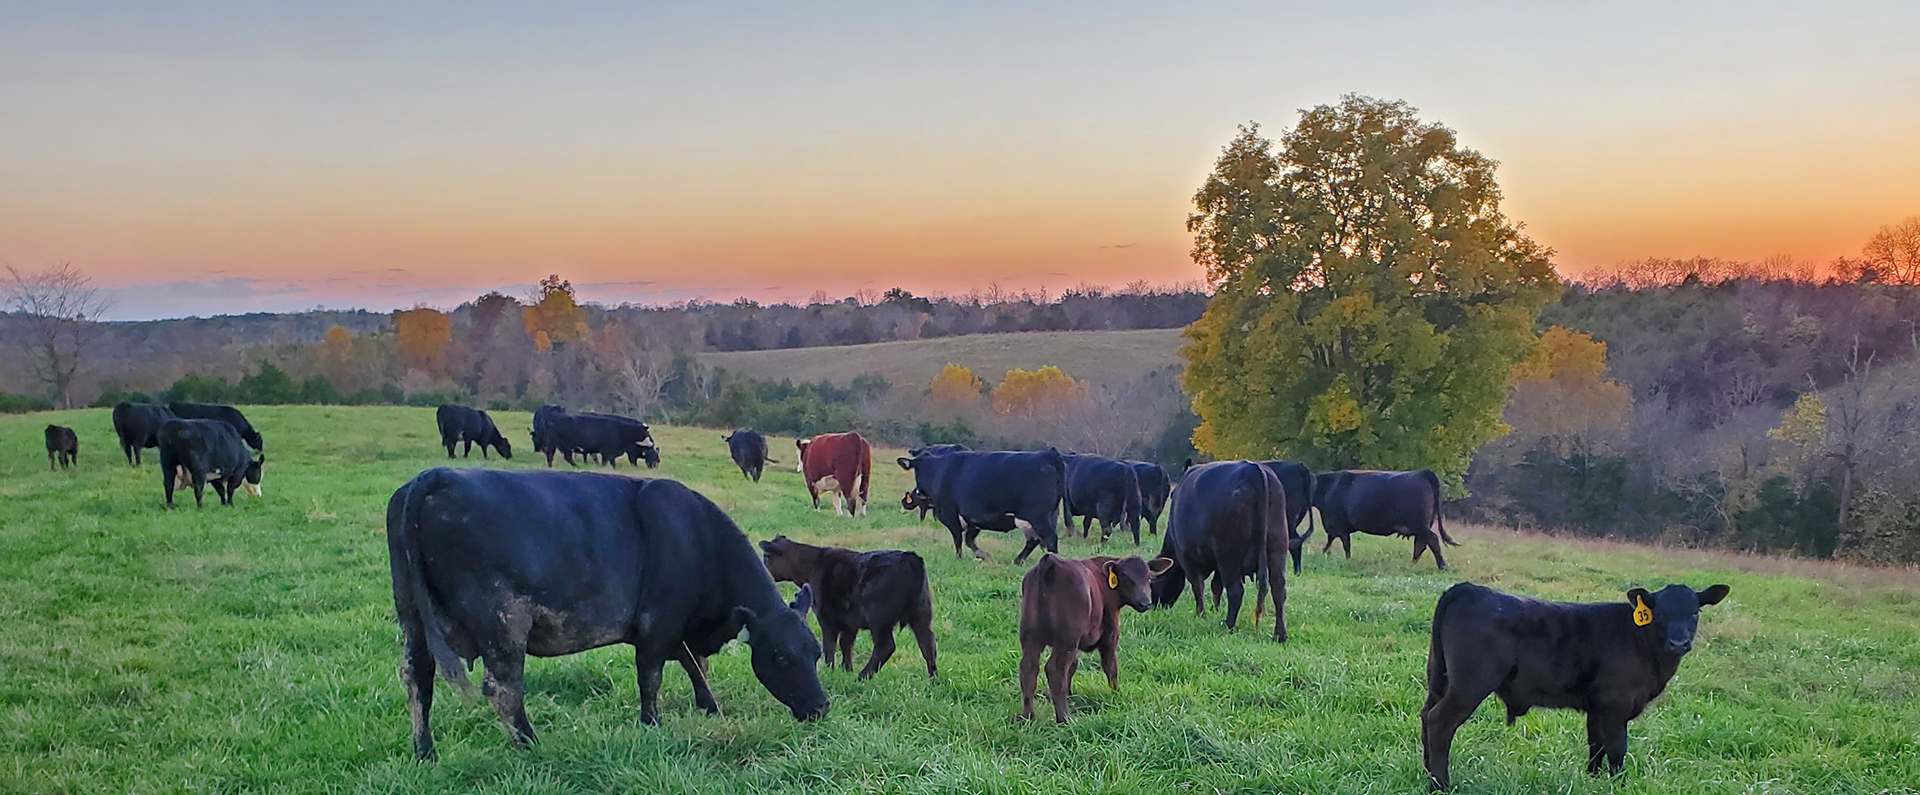 Cows grazing in a pasture at sunset